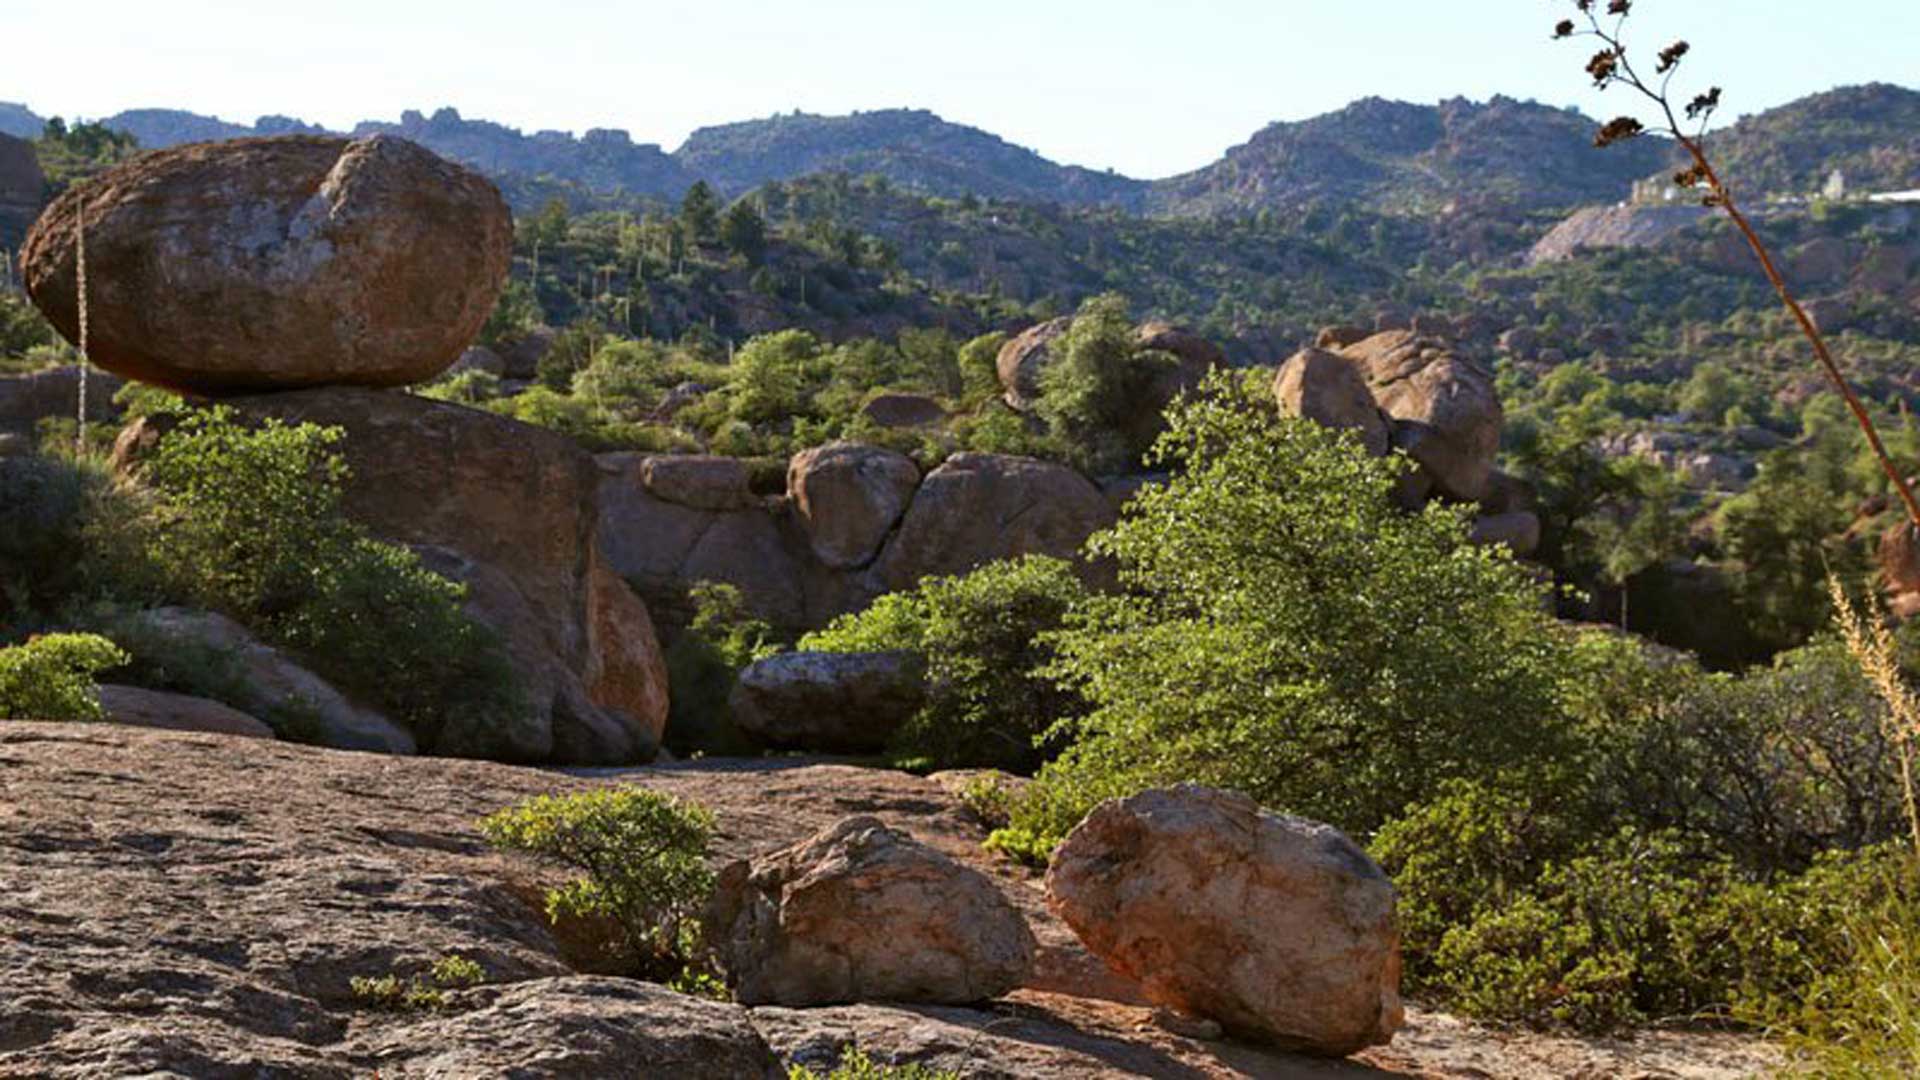 Oak Flat, near where a copper mine is proposed, is dotted with rugged boulders and desert vegetation. 